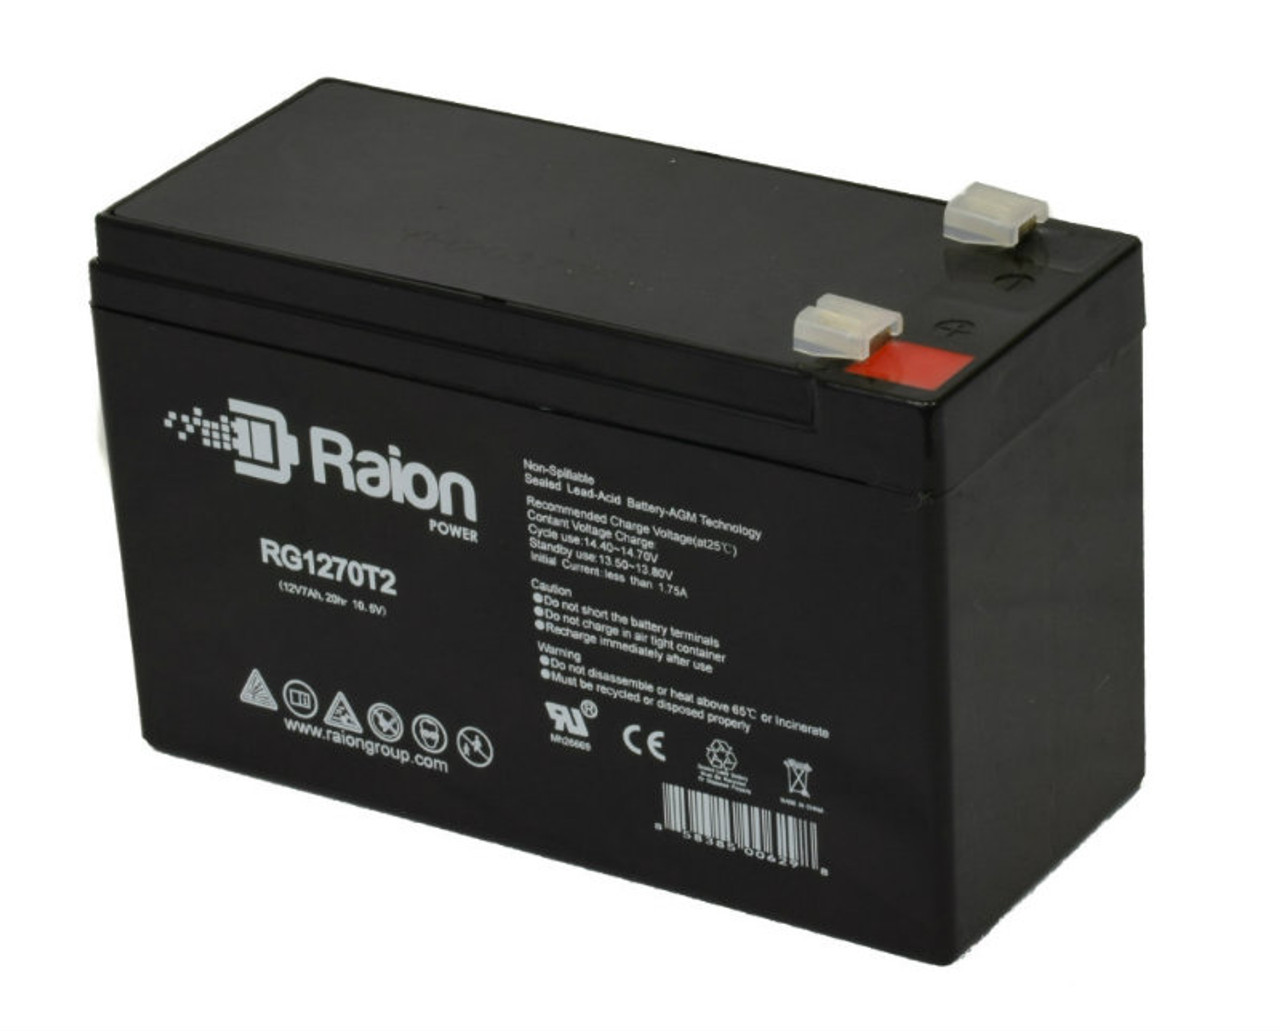 Raion Power RG1270T2 12V 7Ah Rechargeable Battery for Stannah Siena 600 Straight Stairlift